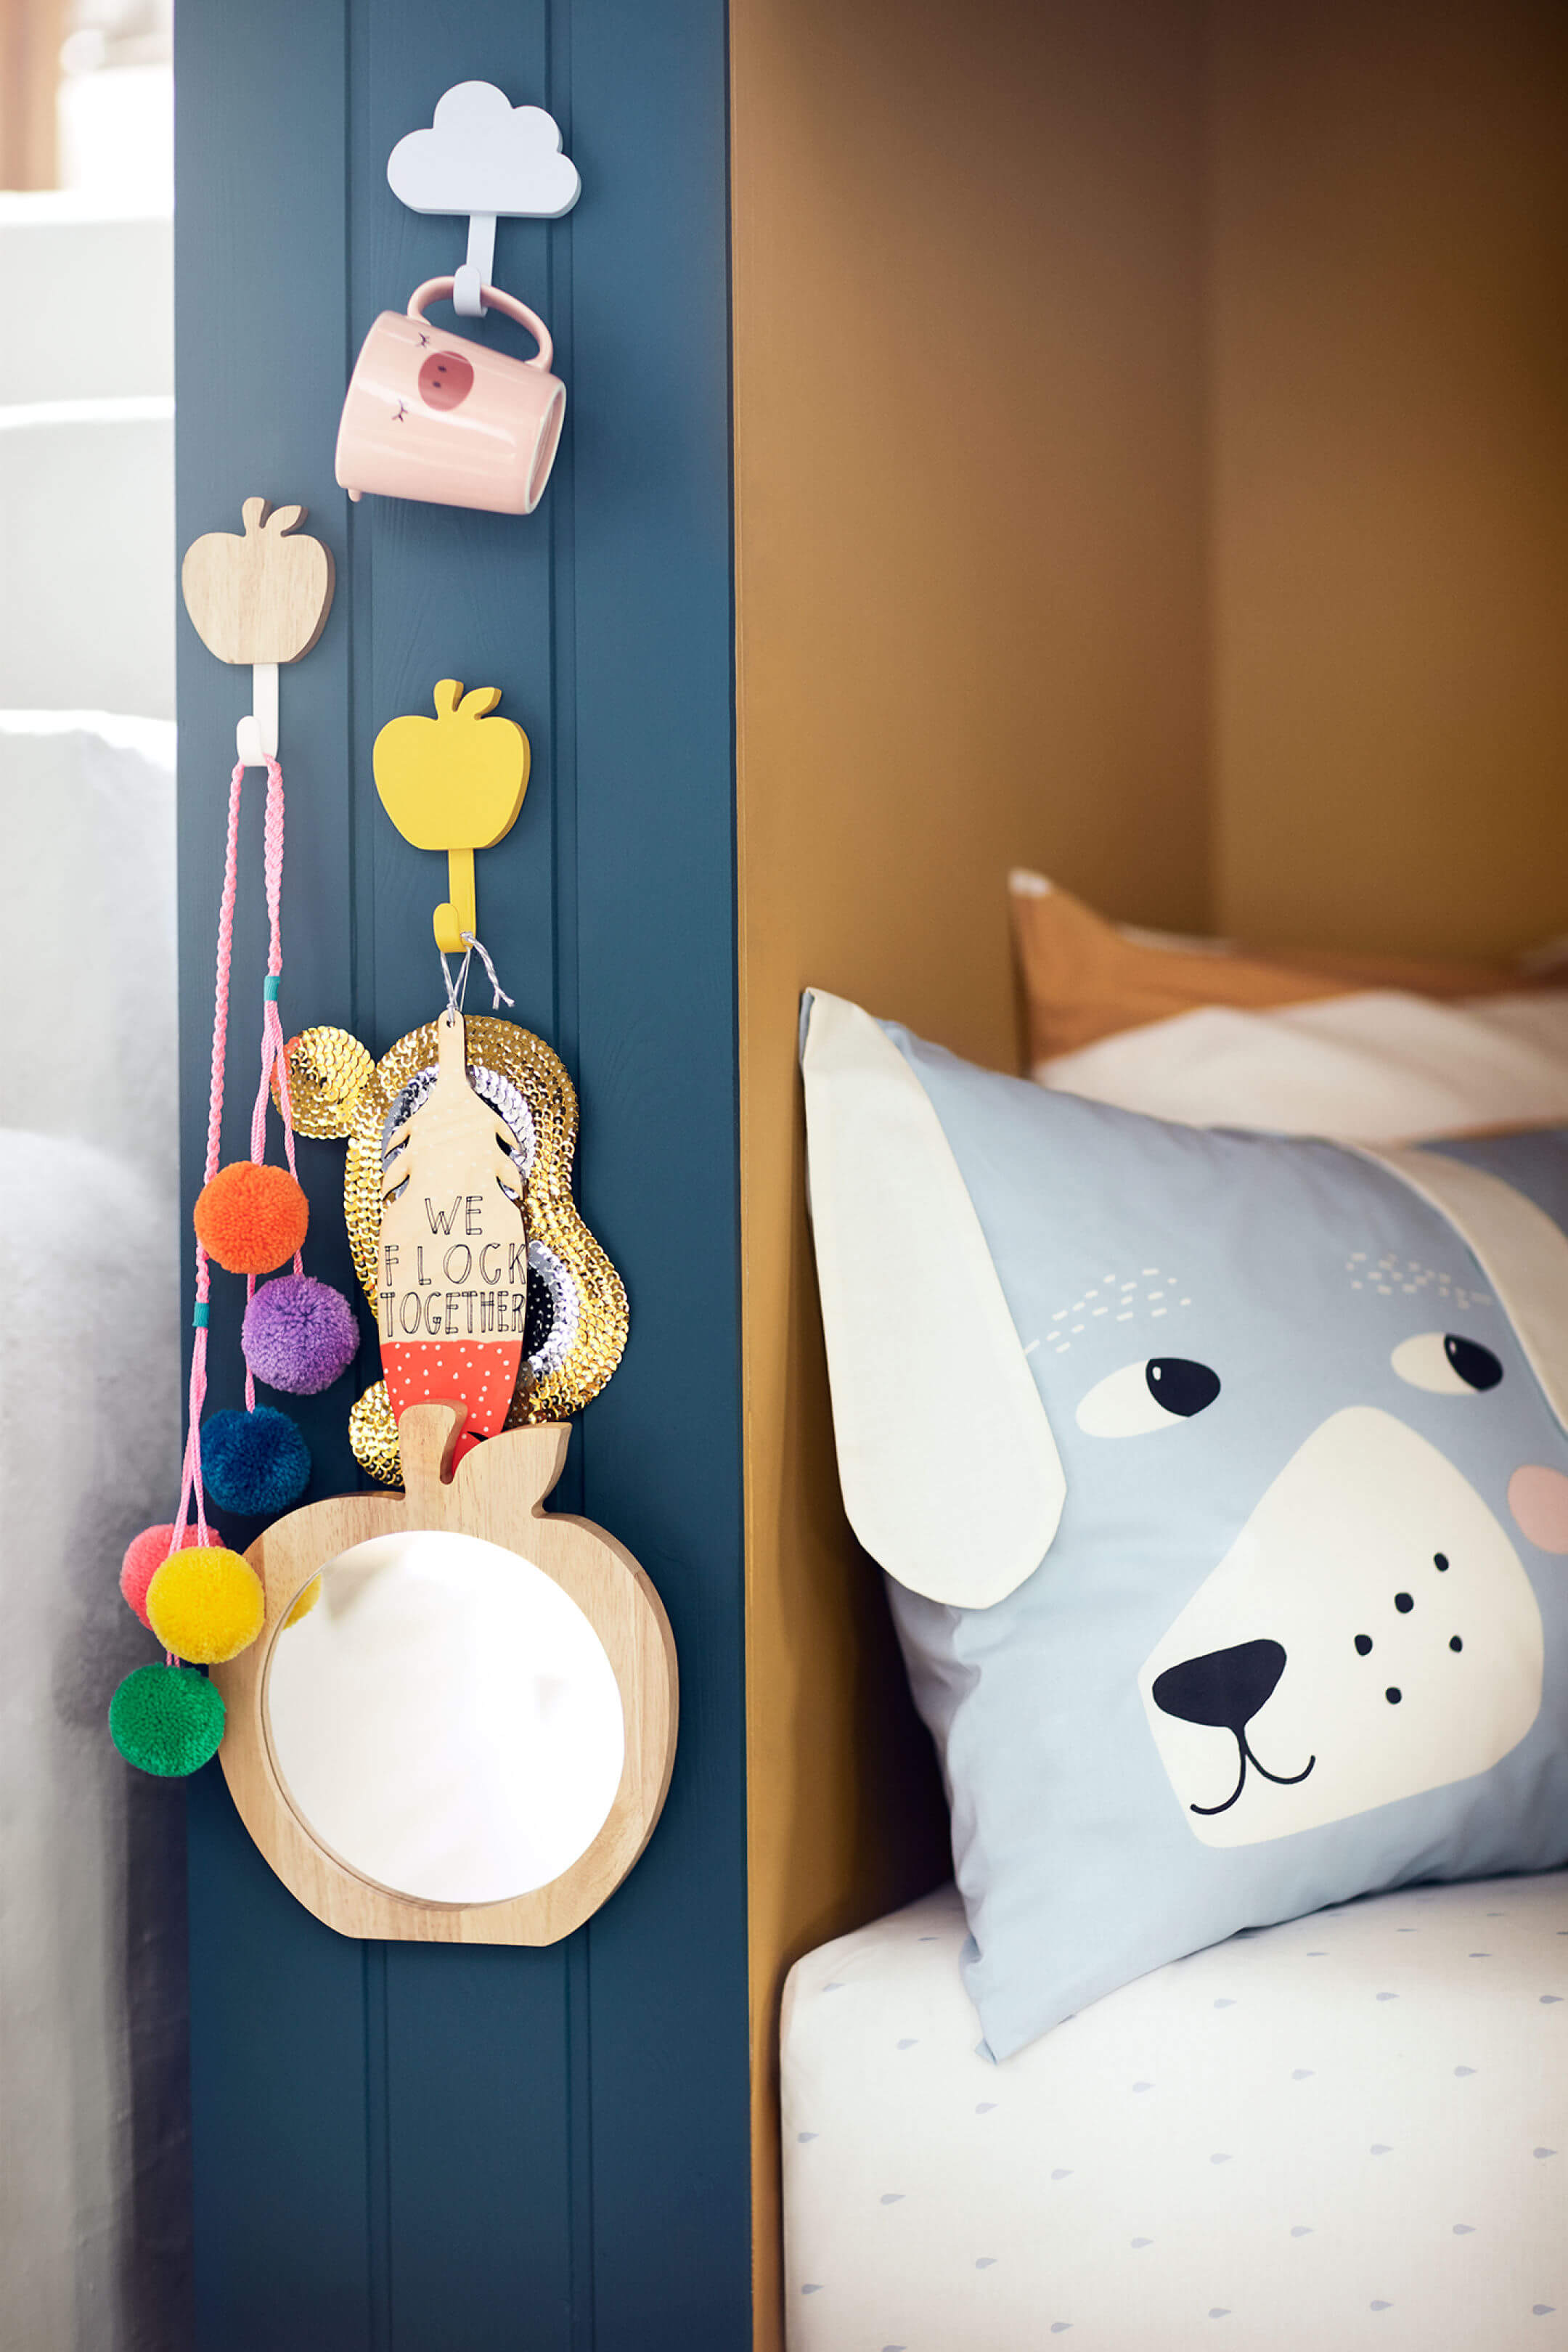 Paul & Paula: 9 fruit inspired and special children's rooms